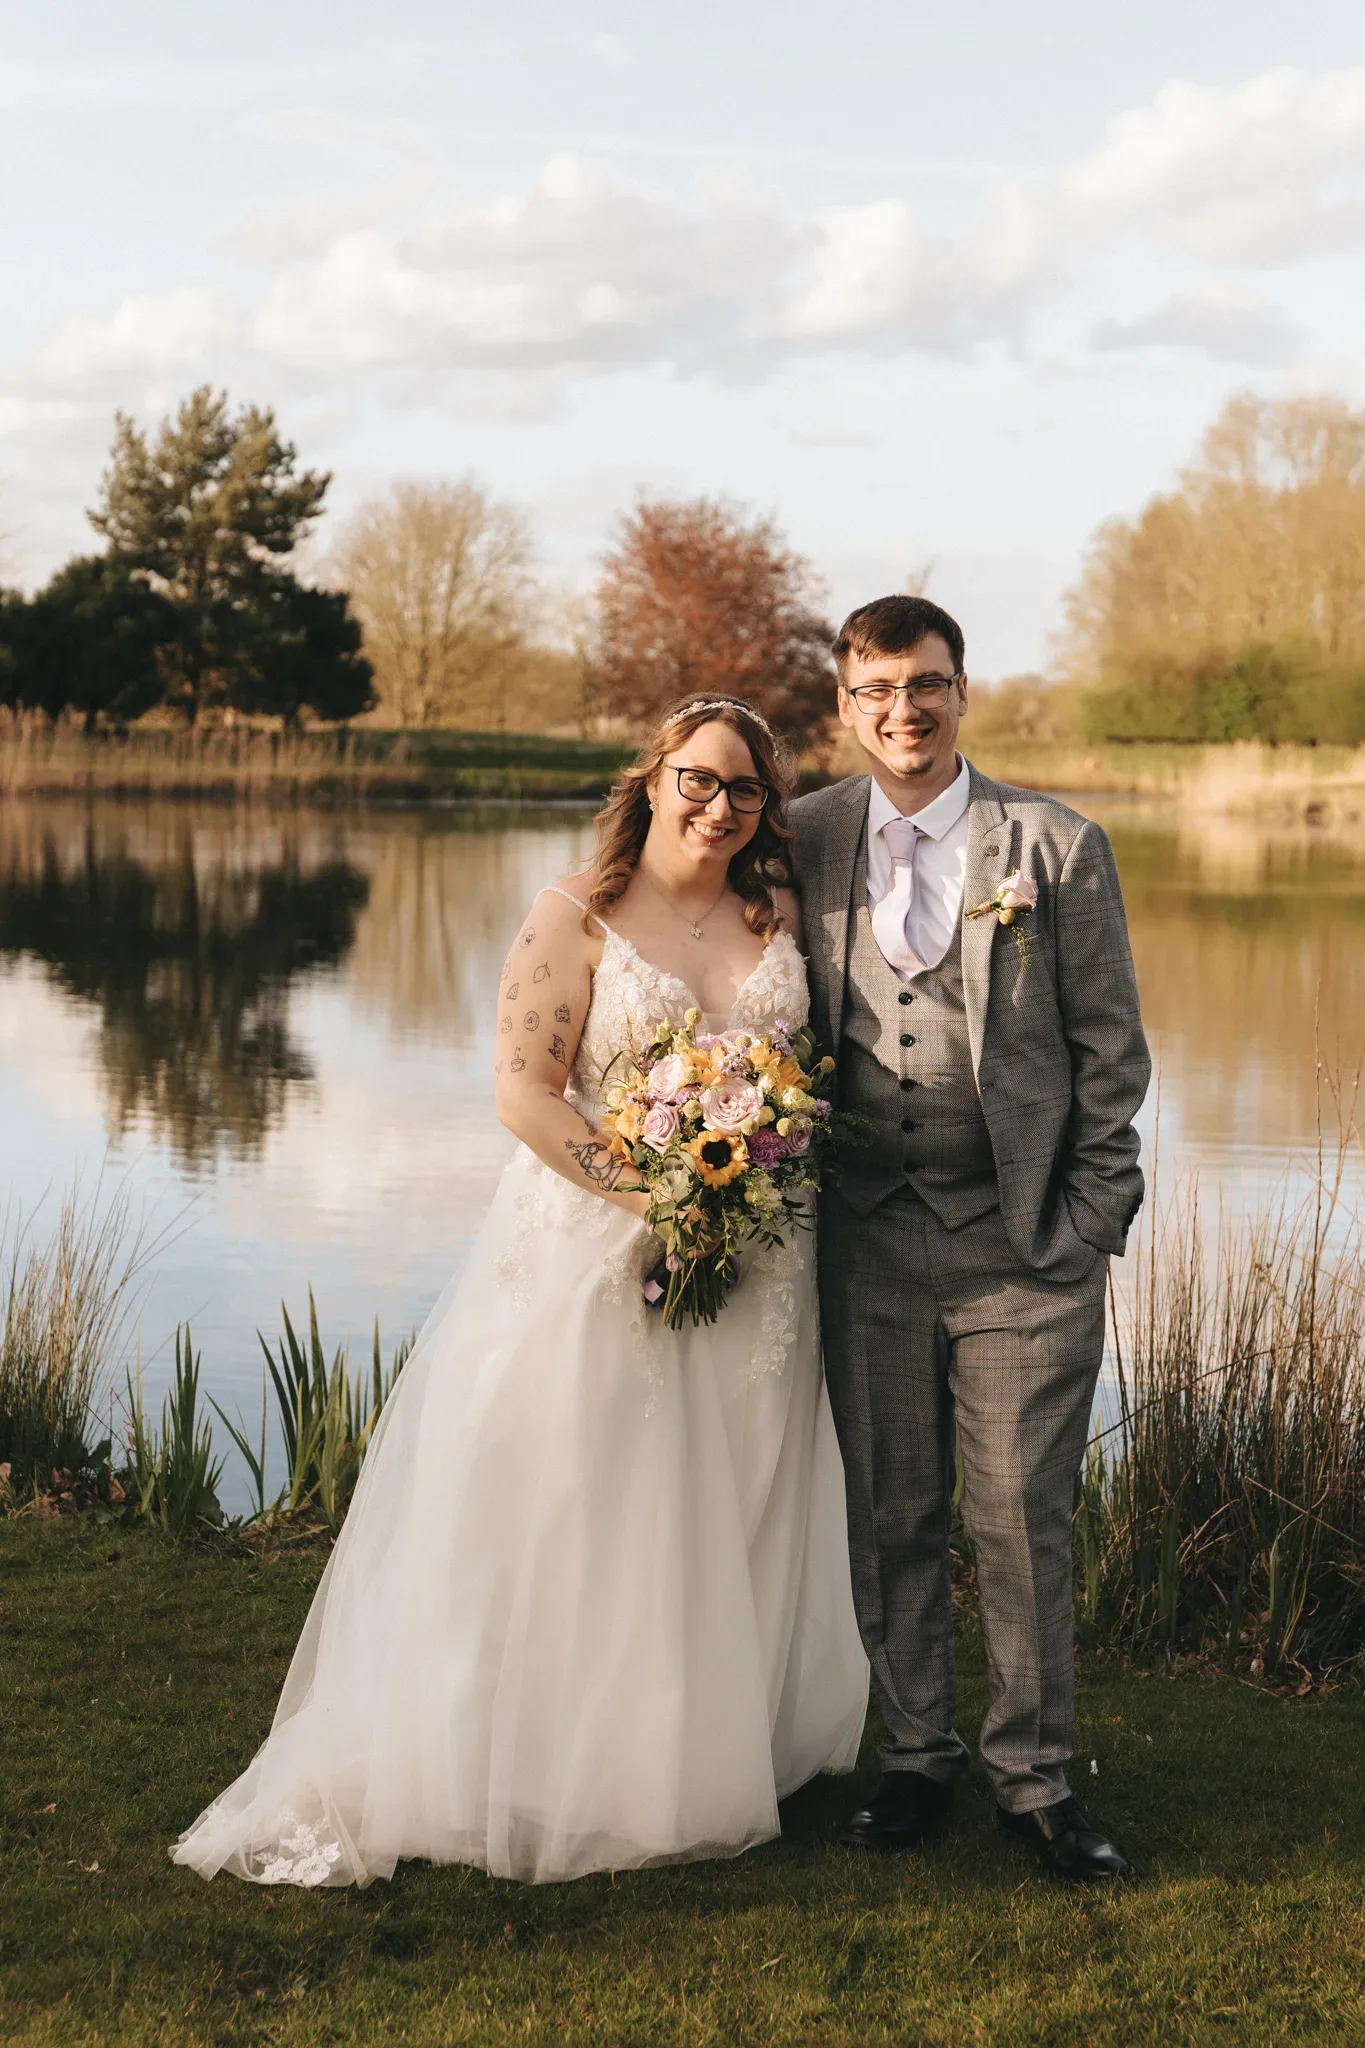 A radiant couple in wedding attire posing with joy by a tranquil lake amidst nature, the bride holding a vibrant bouquet, encapsulating a moment of nuptial bliss.